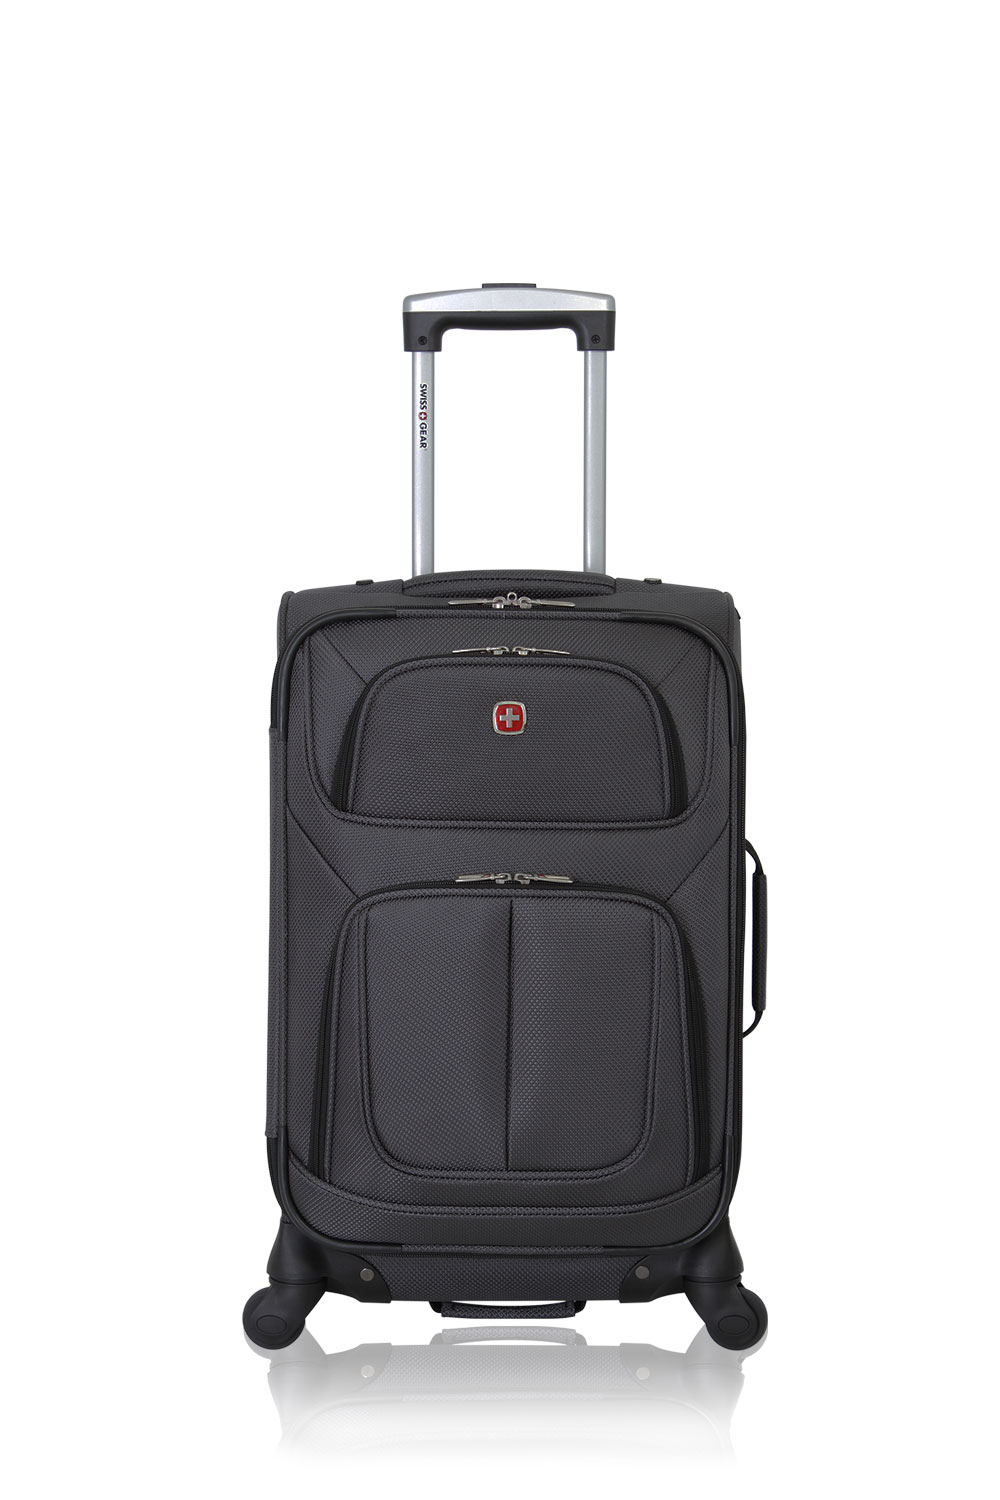 Luggage Sets, Suitcases, \u0026 Carry-Ons